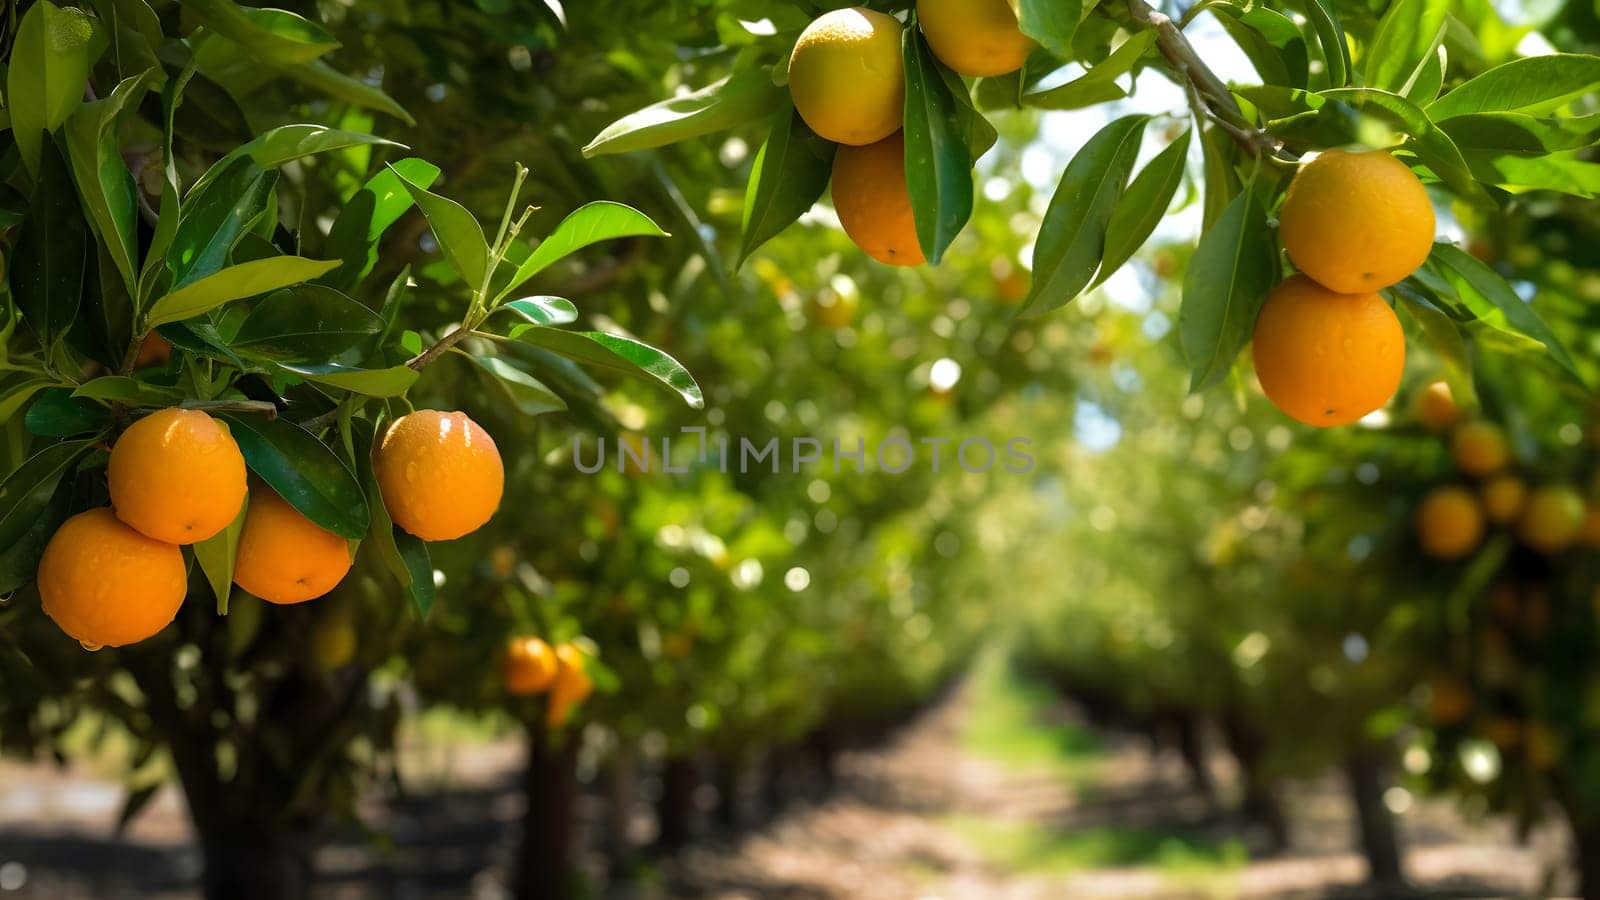 Oranges Ripening at Agriculture Farm at sunny summer day, neural network generated photorealistic image by z1b